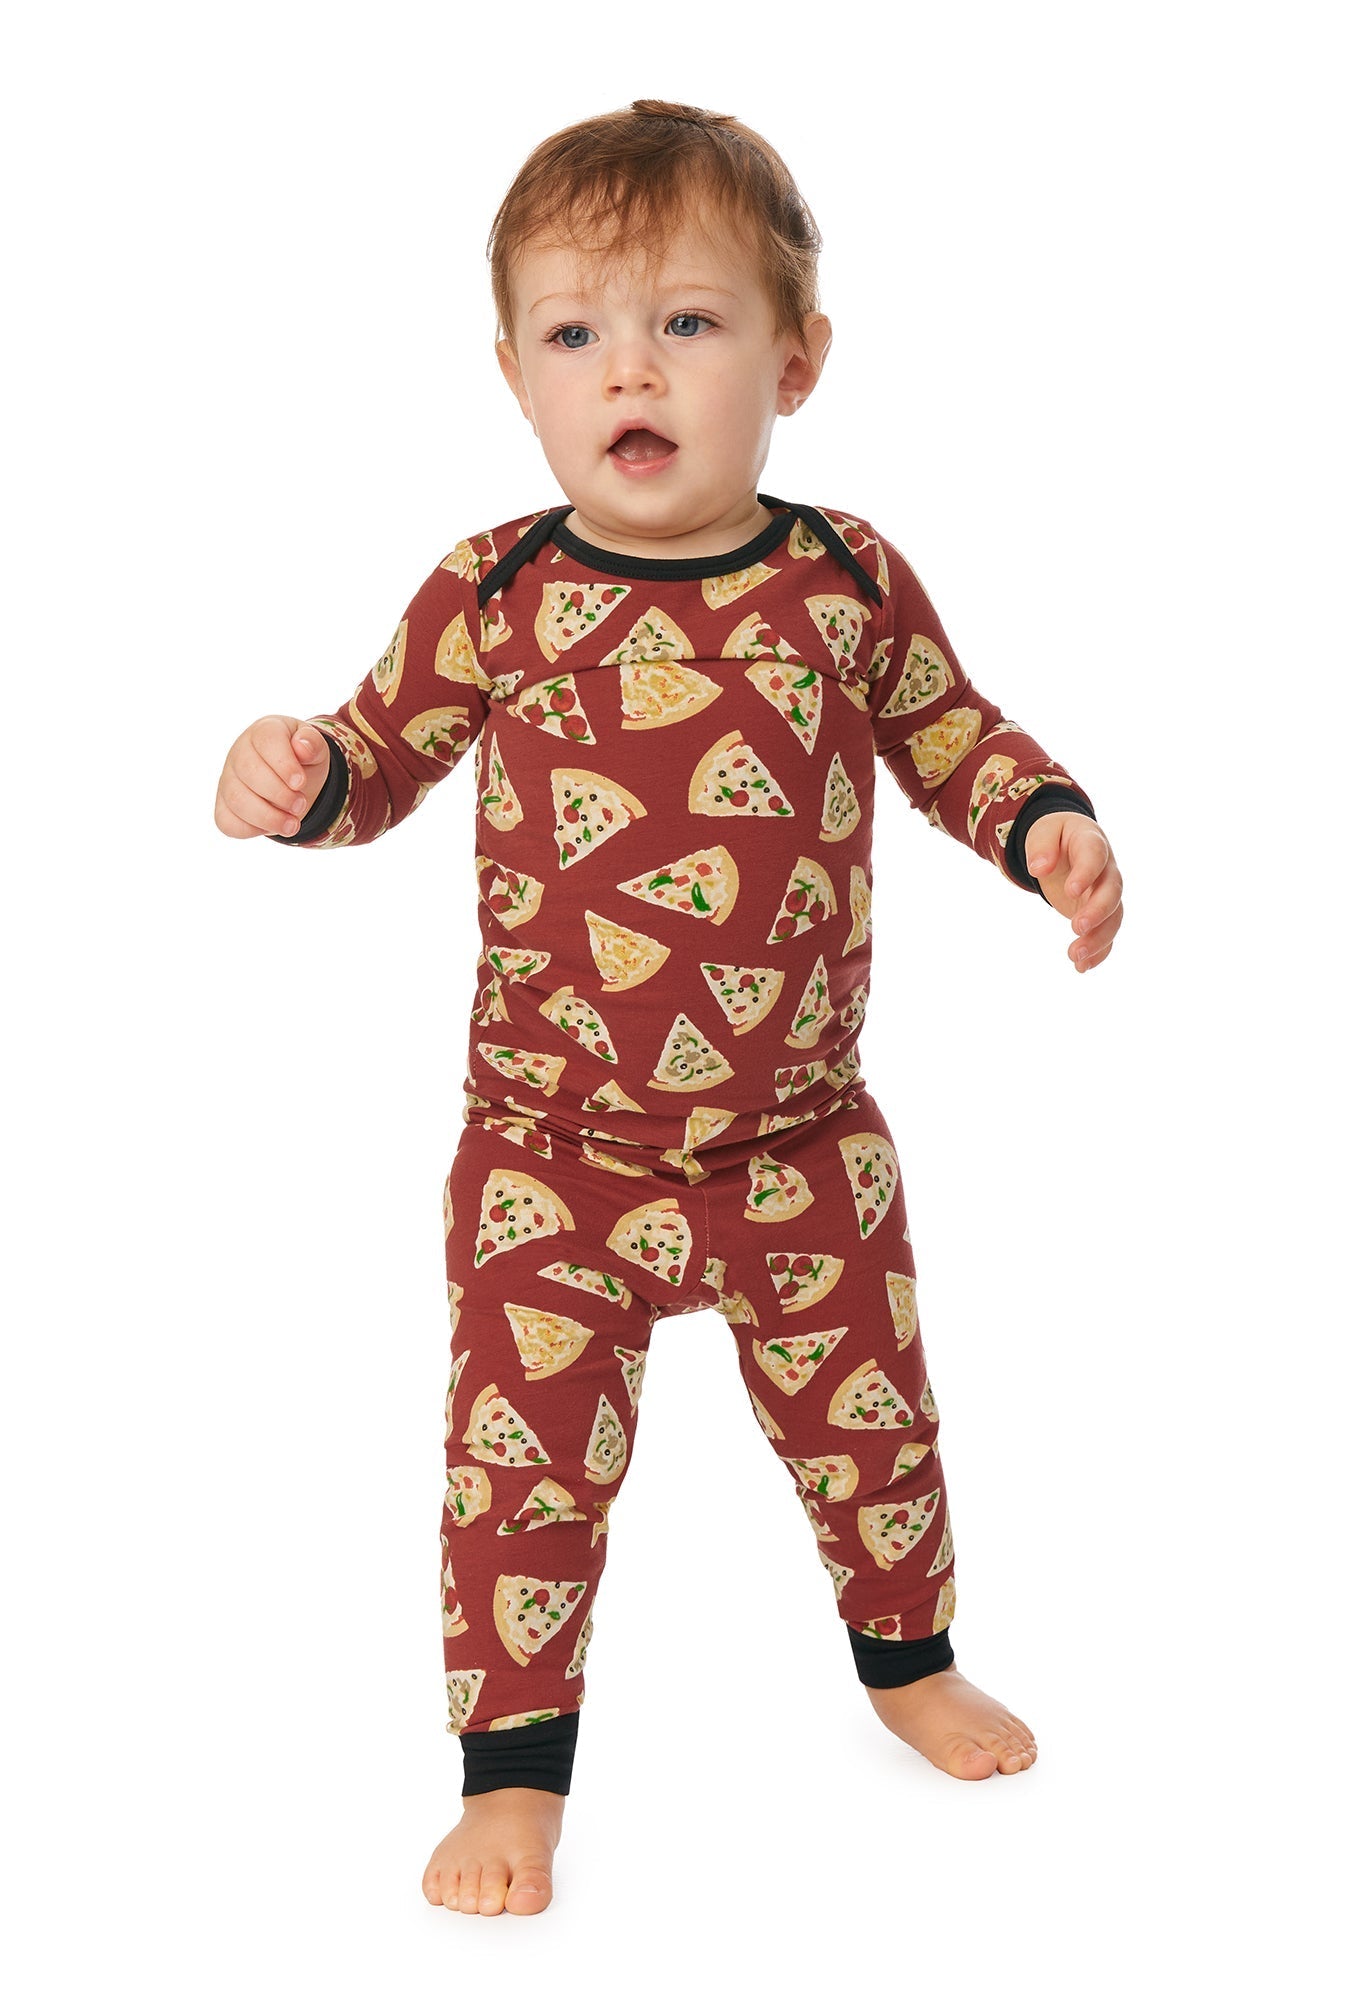 A baby wearing a brown long sleeve pj set with pizza pattern.